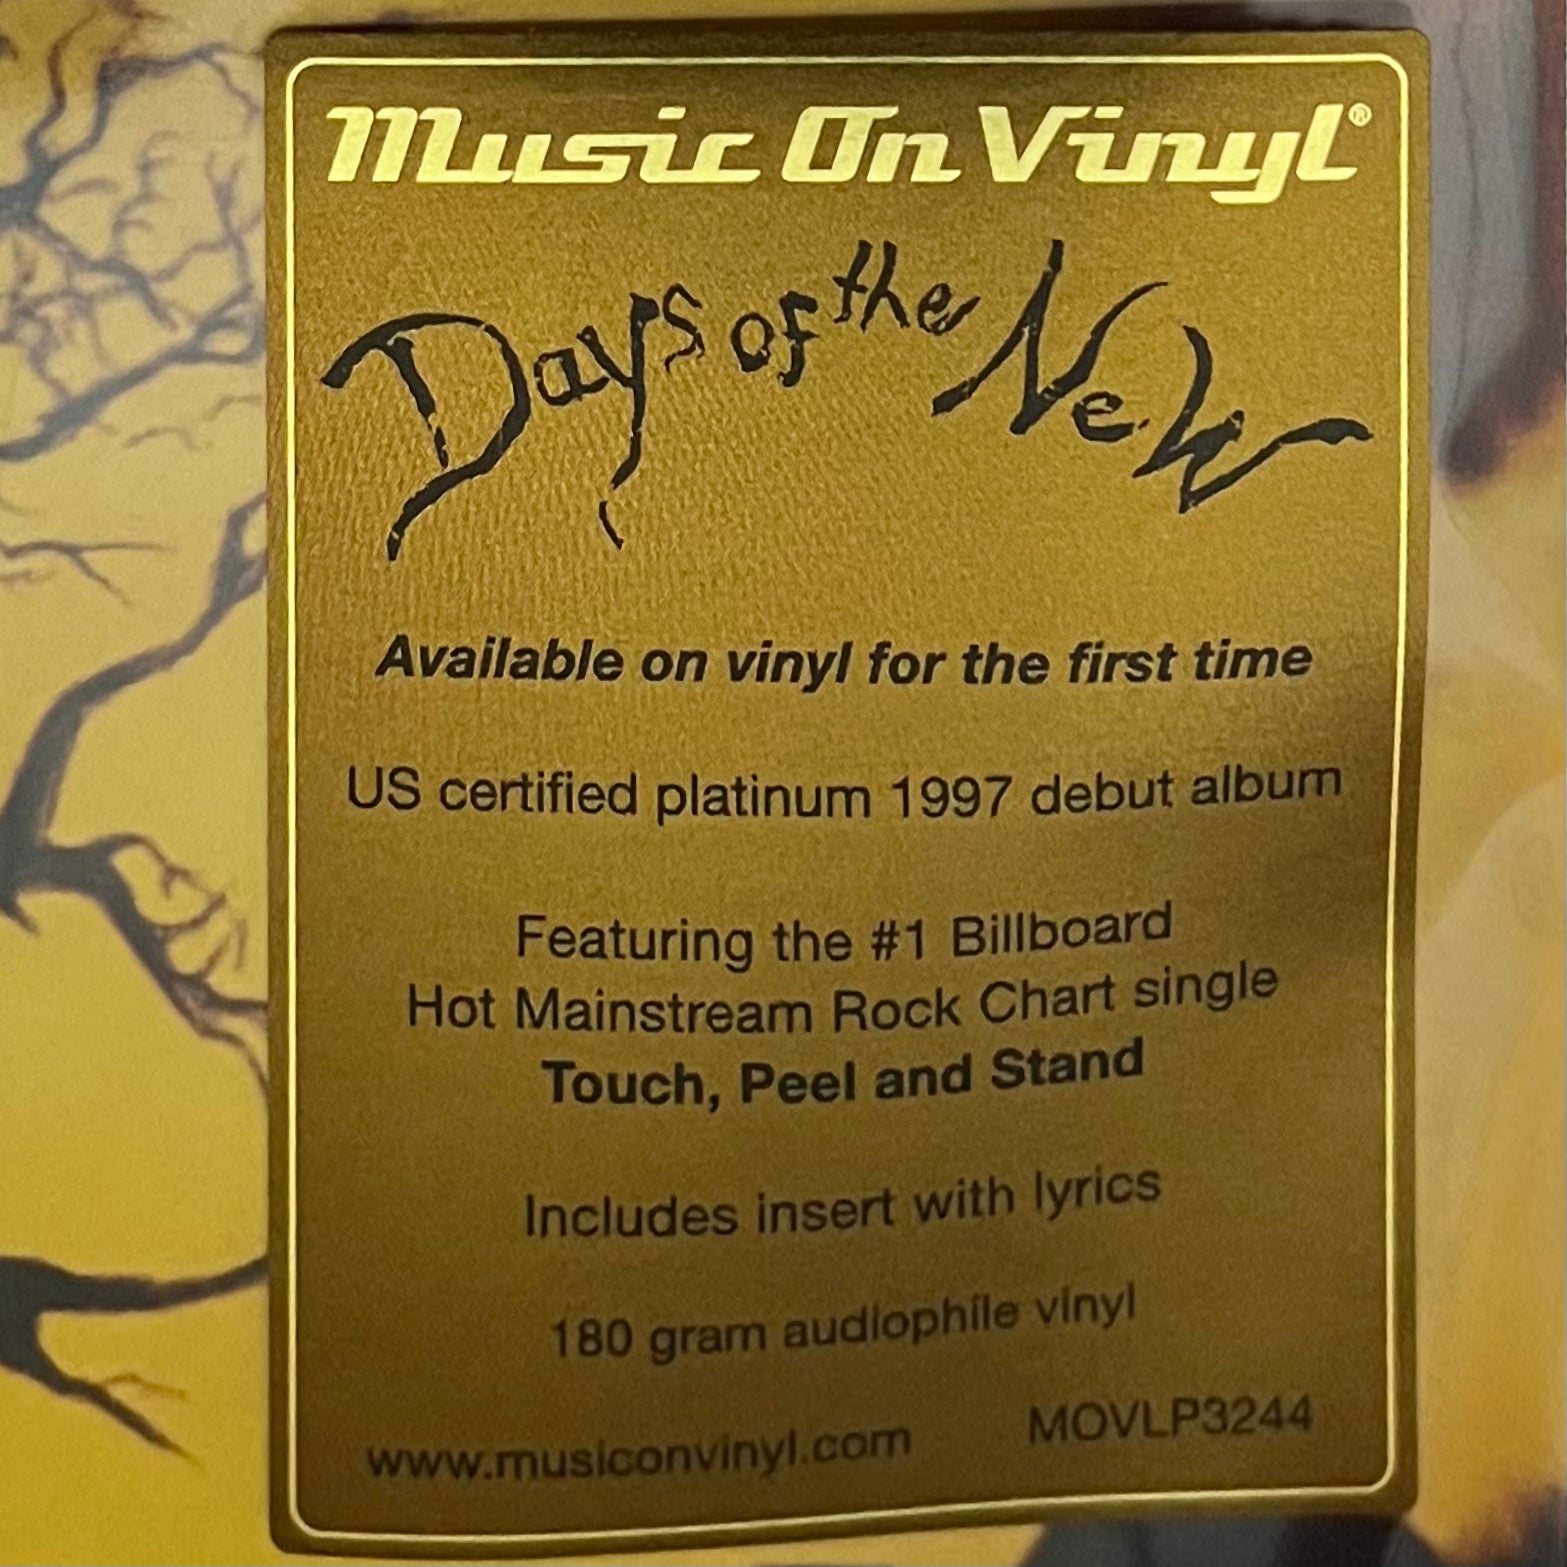 Days Of The New - Days Of The New (Music On Vinyl)